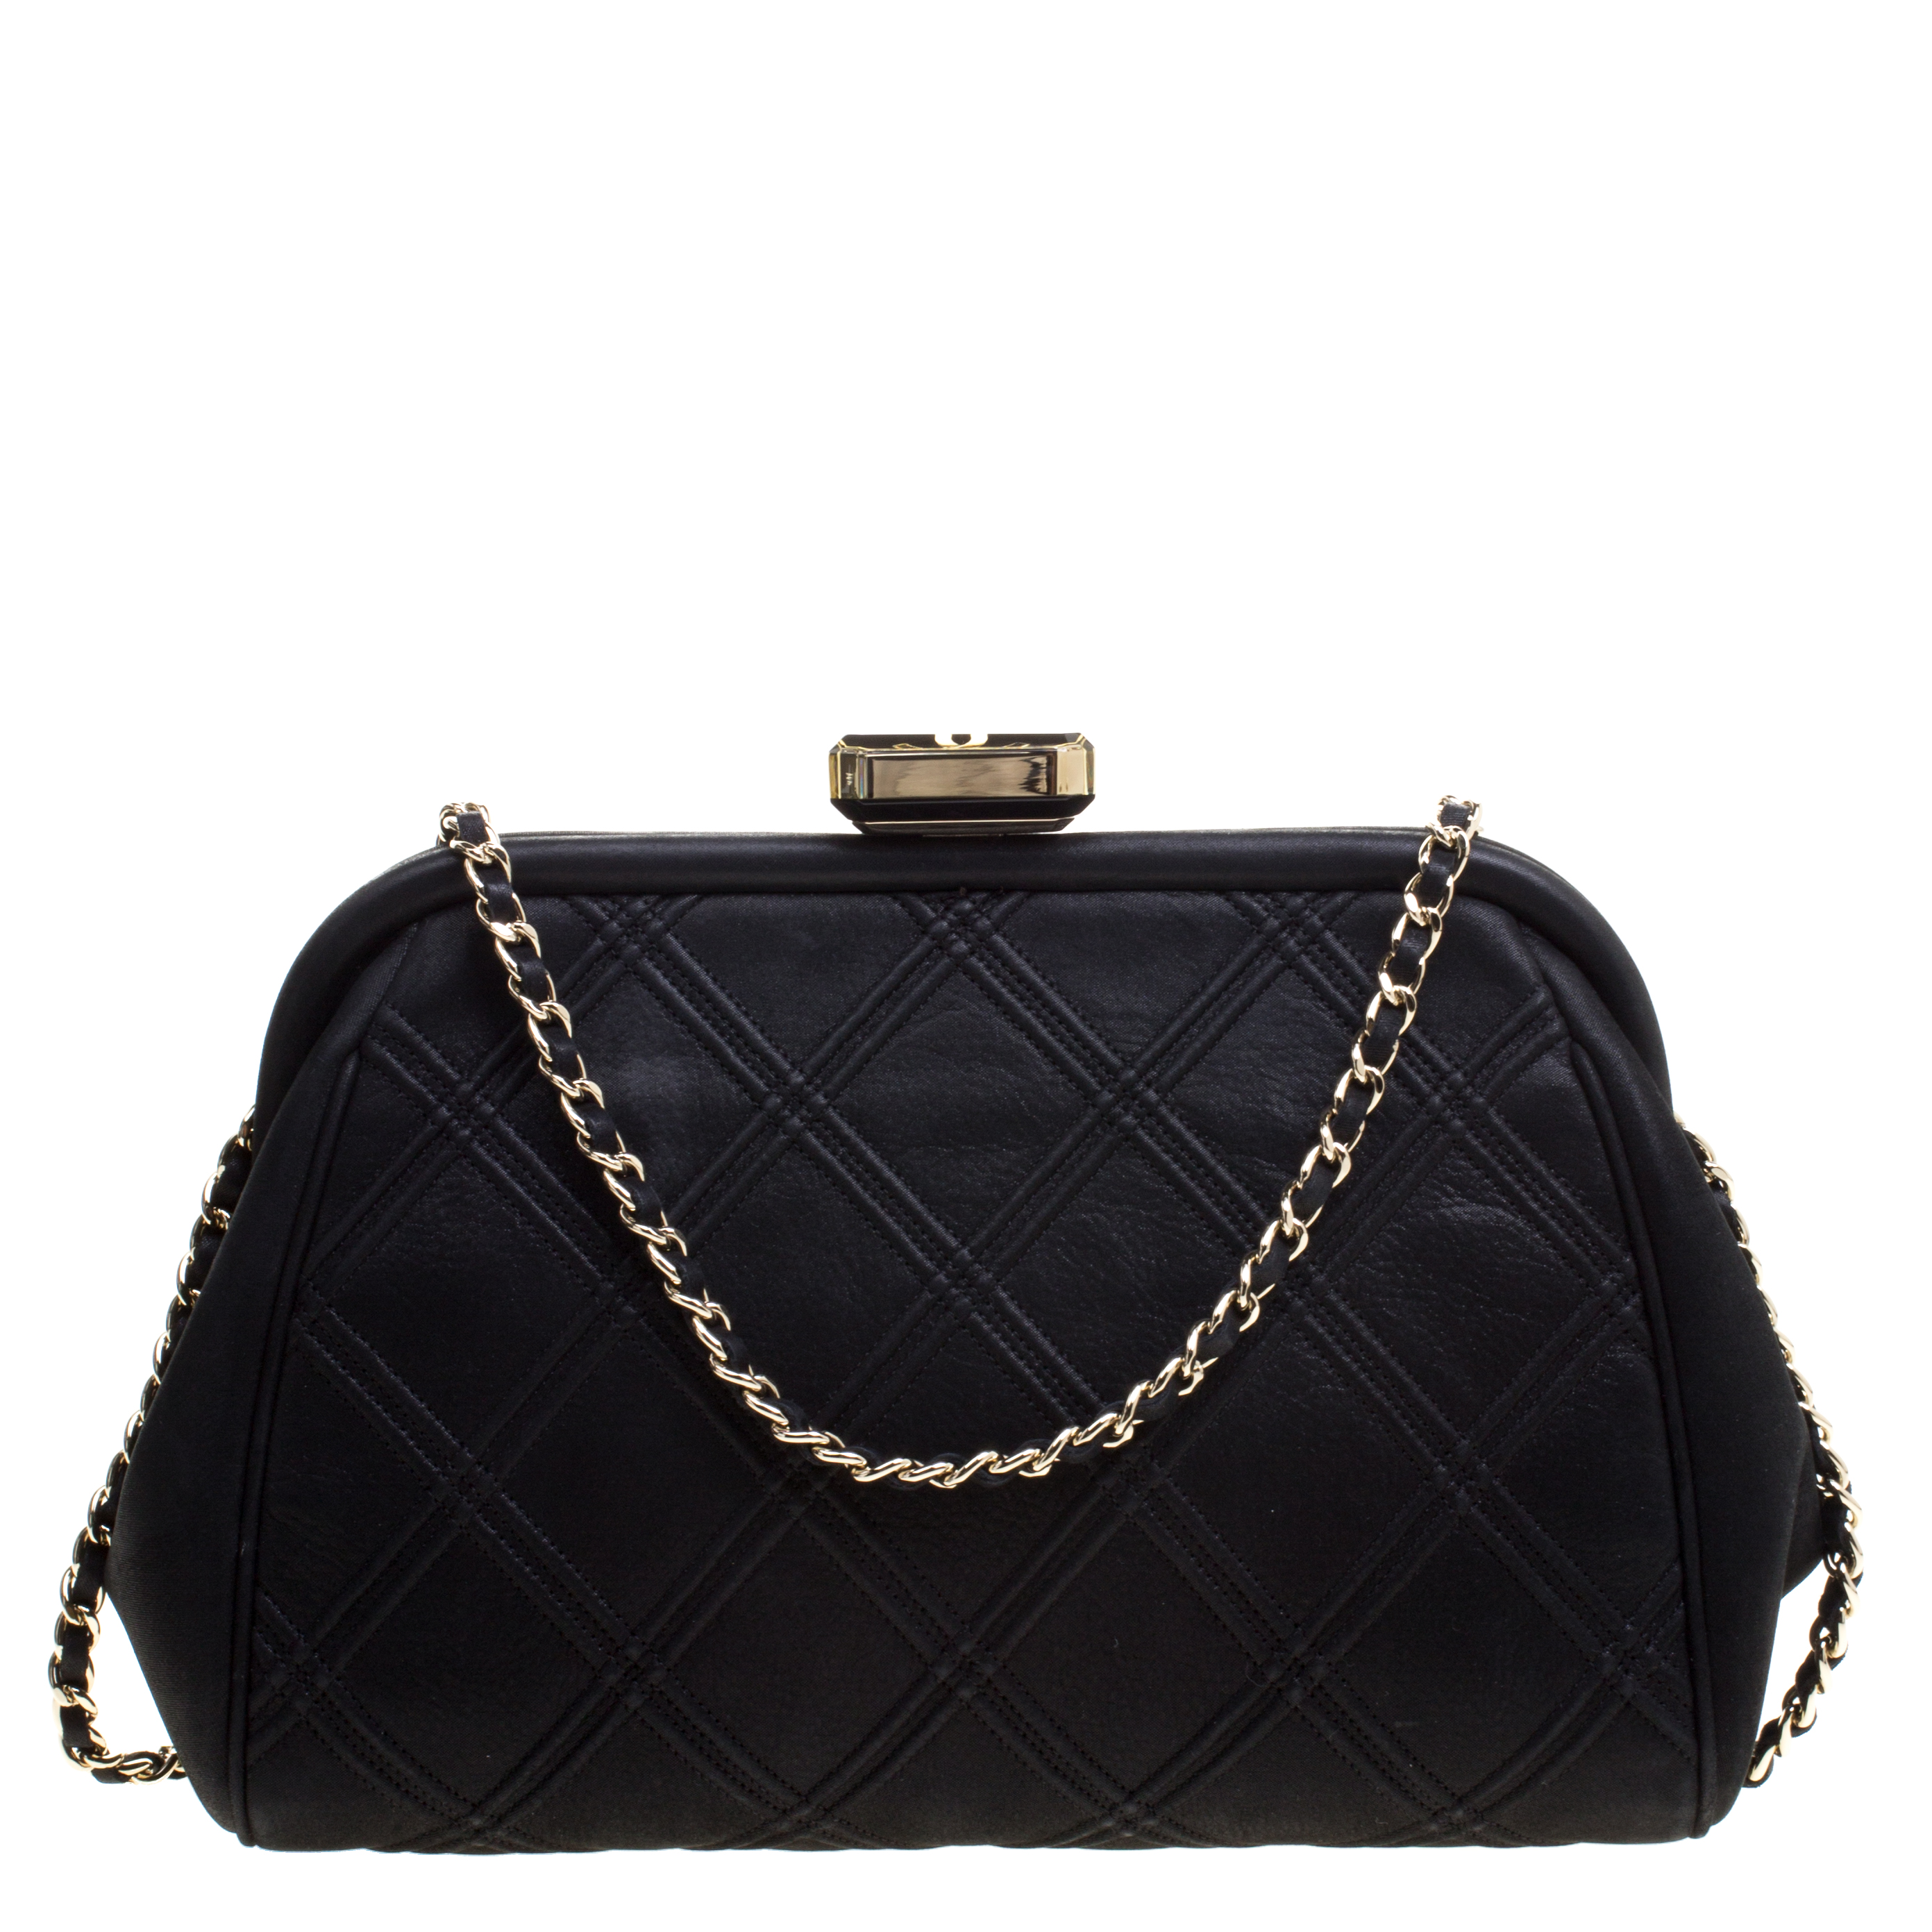 Chanel Black Quilted Double Stitch Leather Timeless Clutch